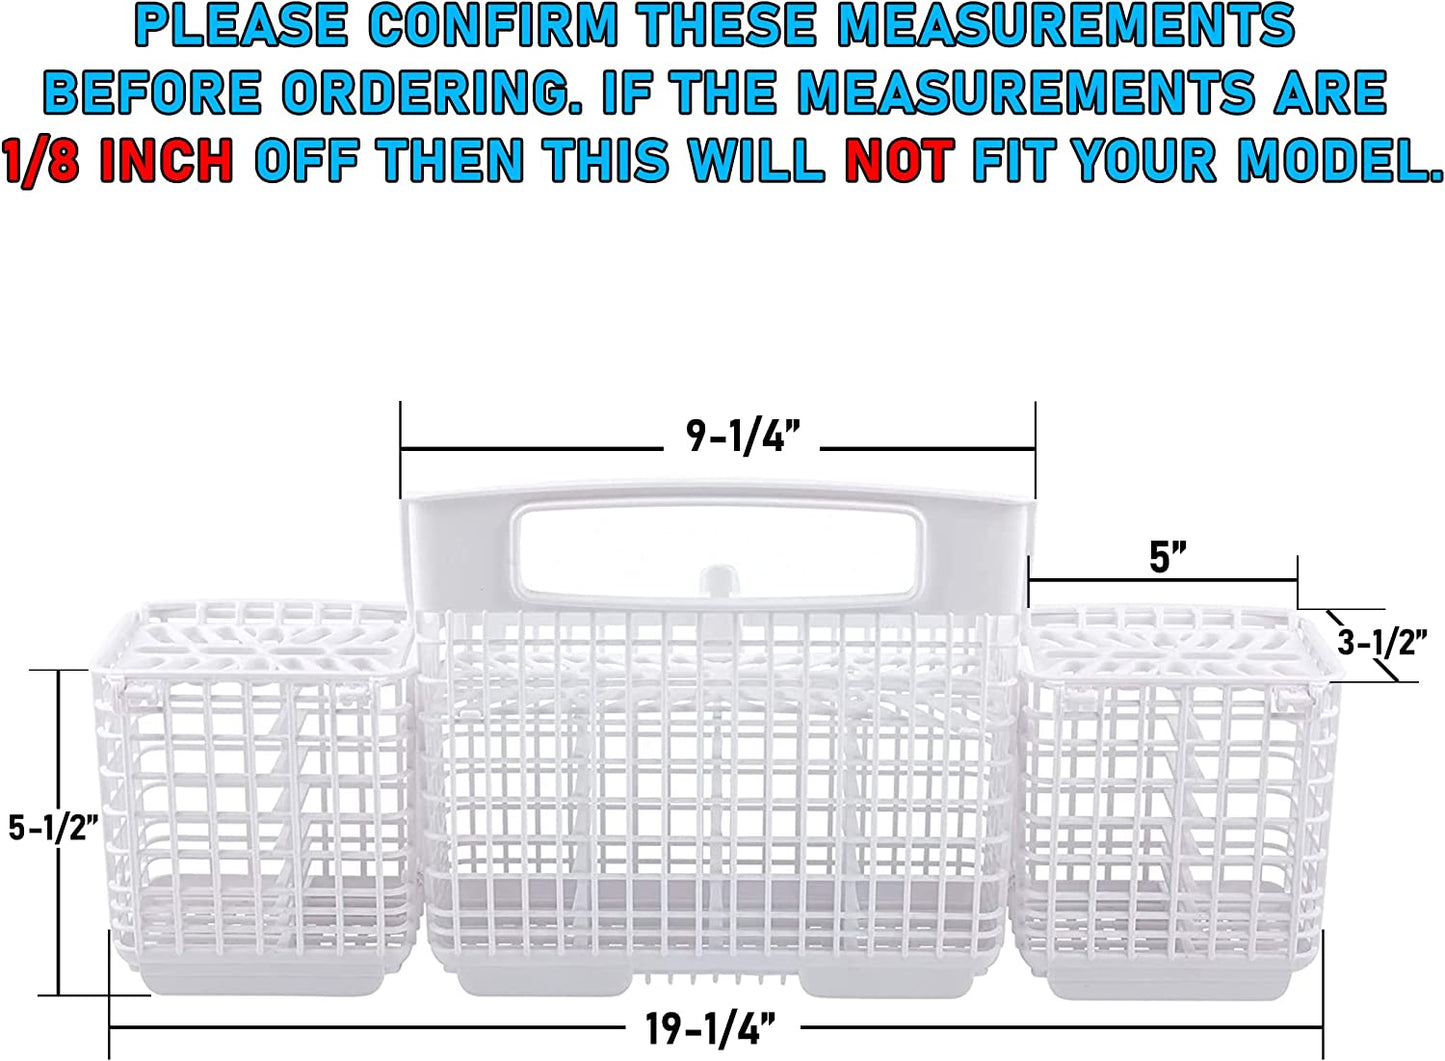 W10807920 Silverware Basket Compatible with Whirlpool, Kenmore Dishwasher - 8562080, WP8562080, 8562086